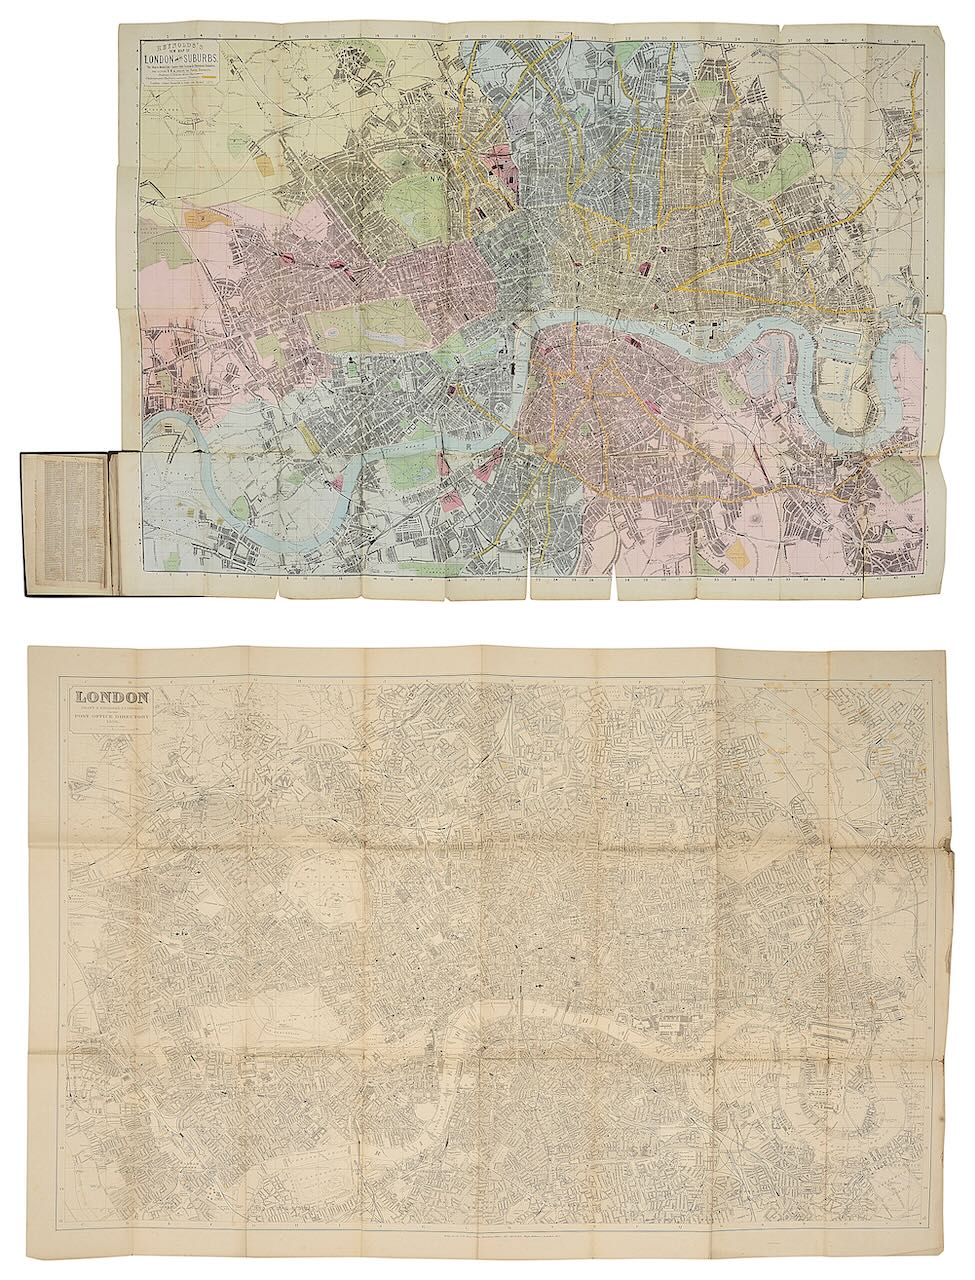 London. Reynolds' Large Coloured Map of London and another - Image 2 of 2